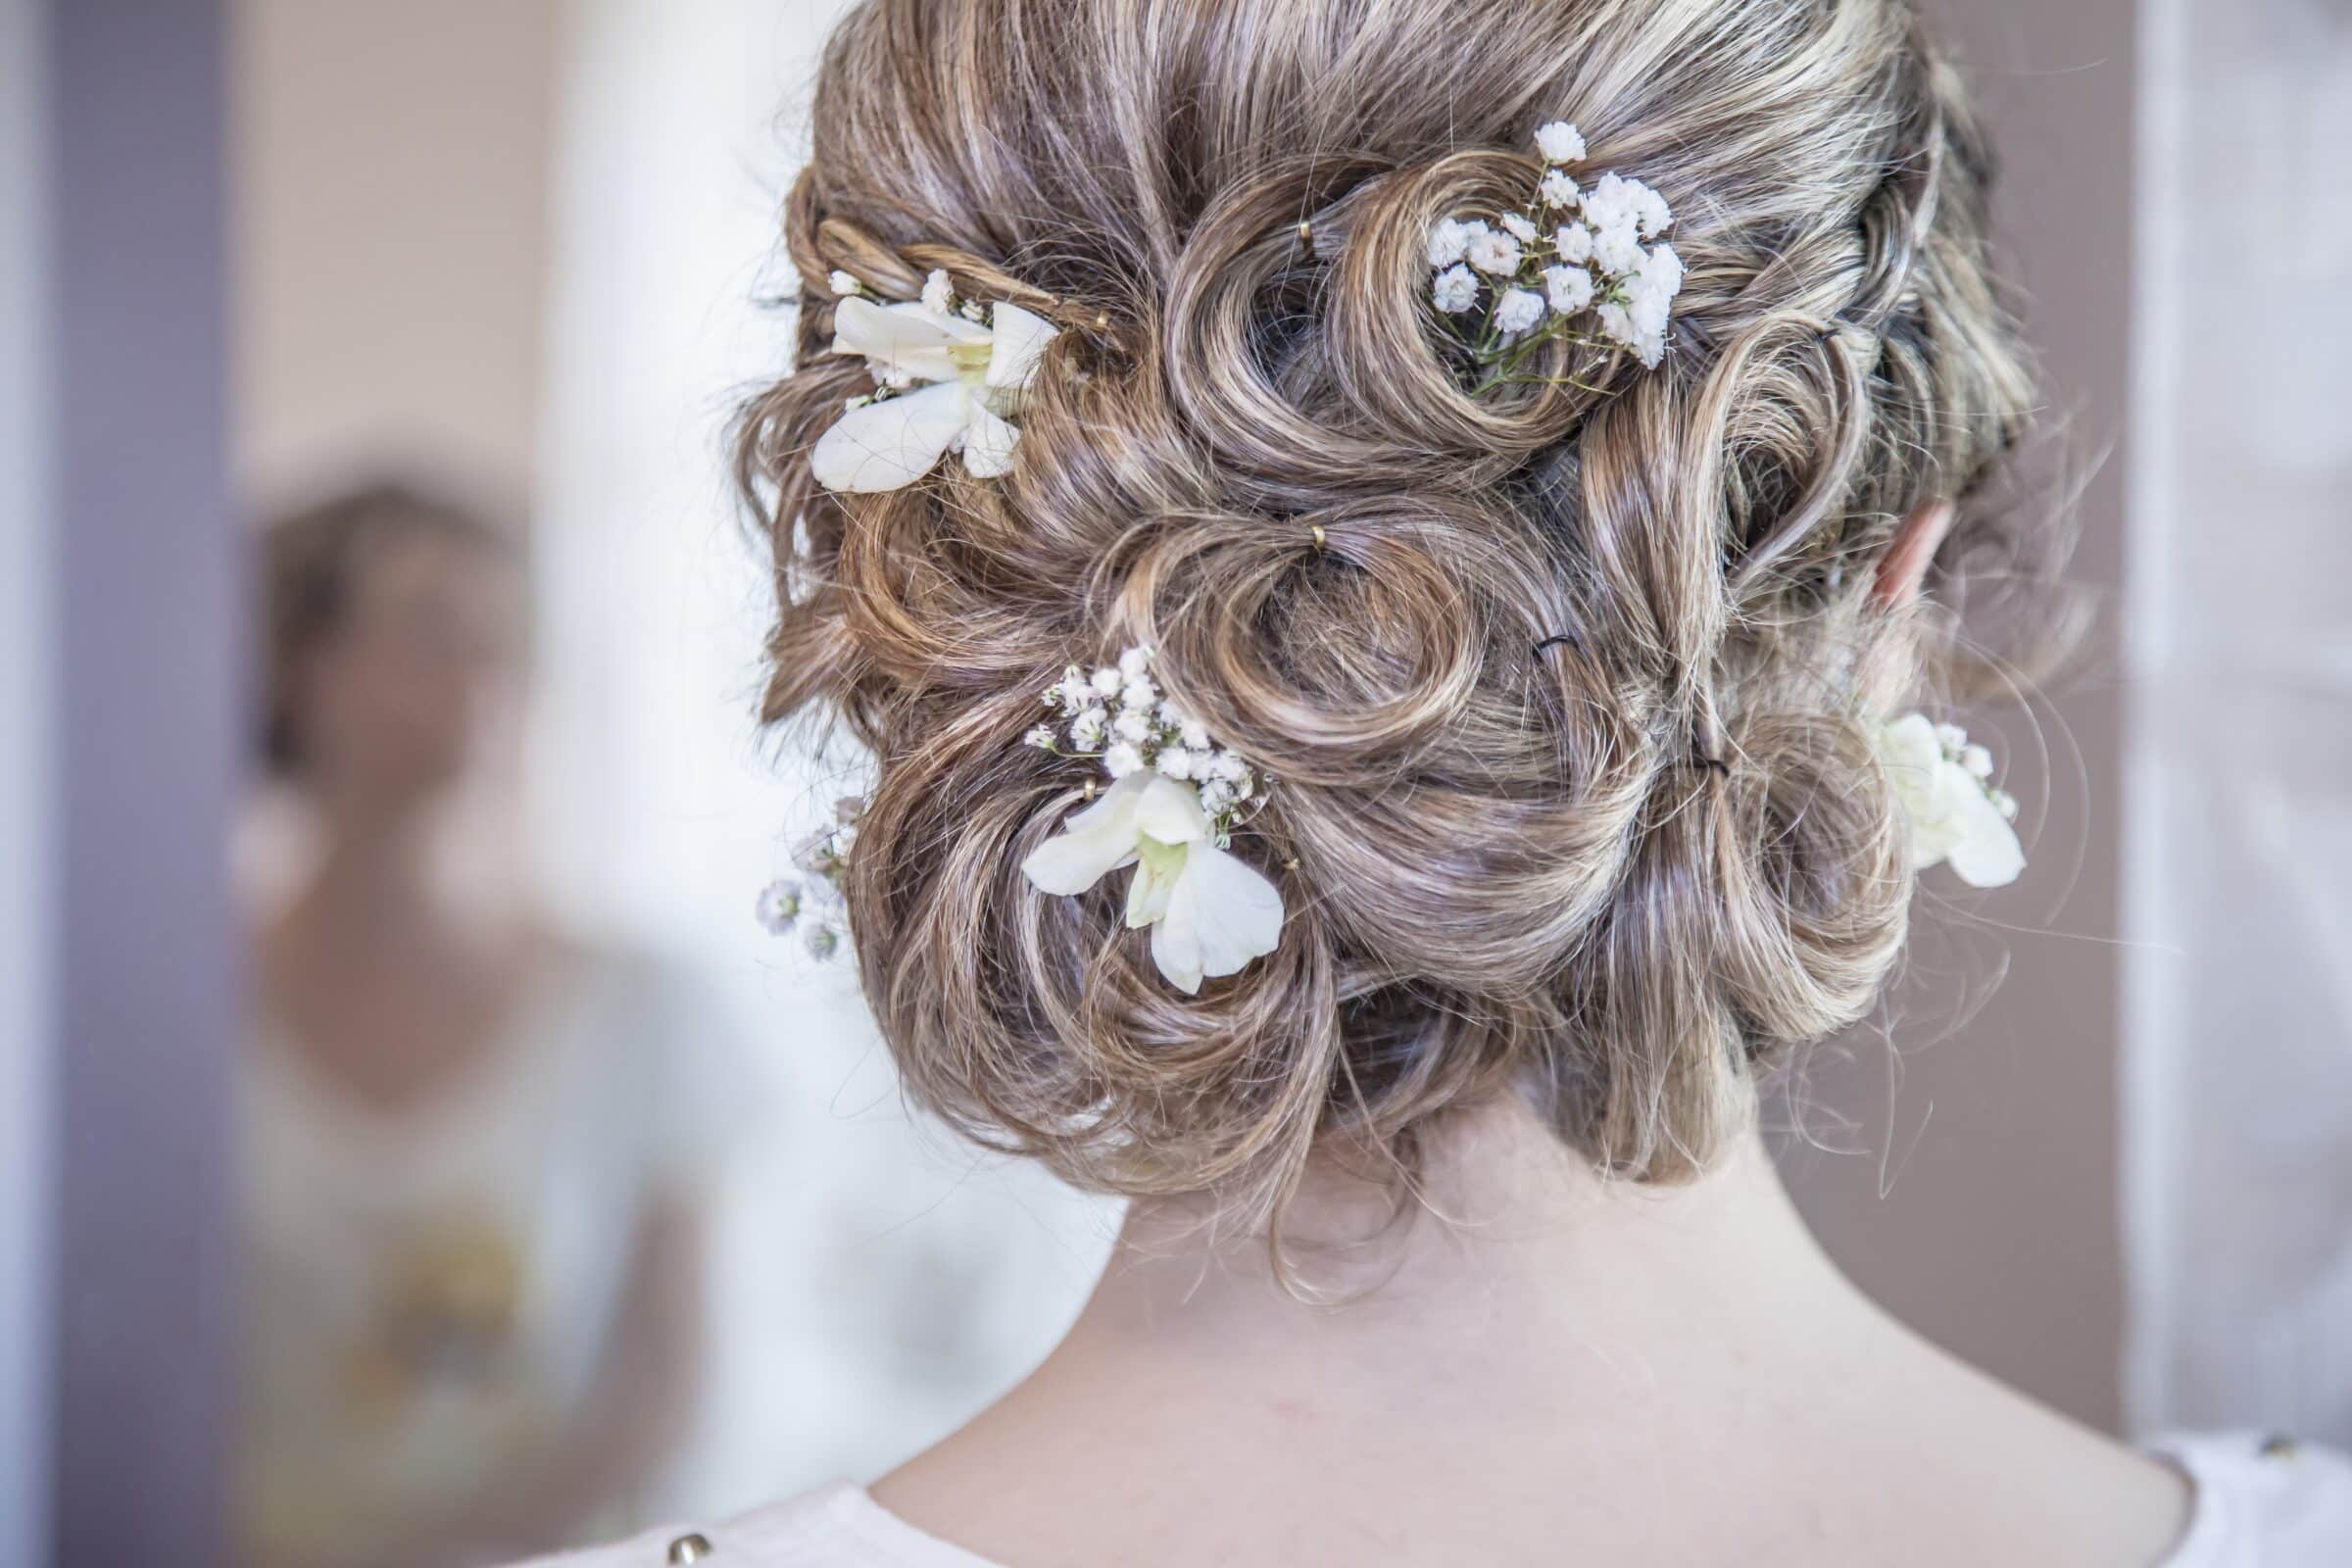 Bridal Makeup Artists and Wedding Hair Stylists Featured Image